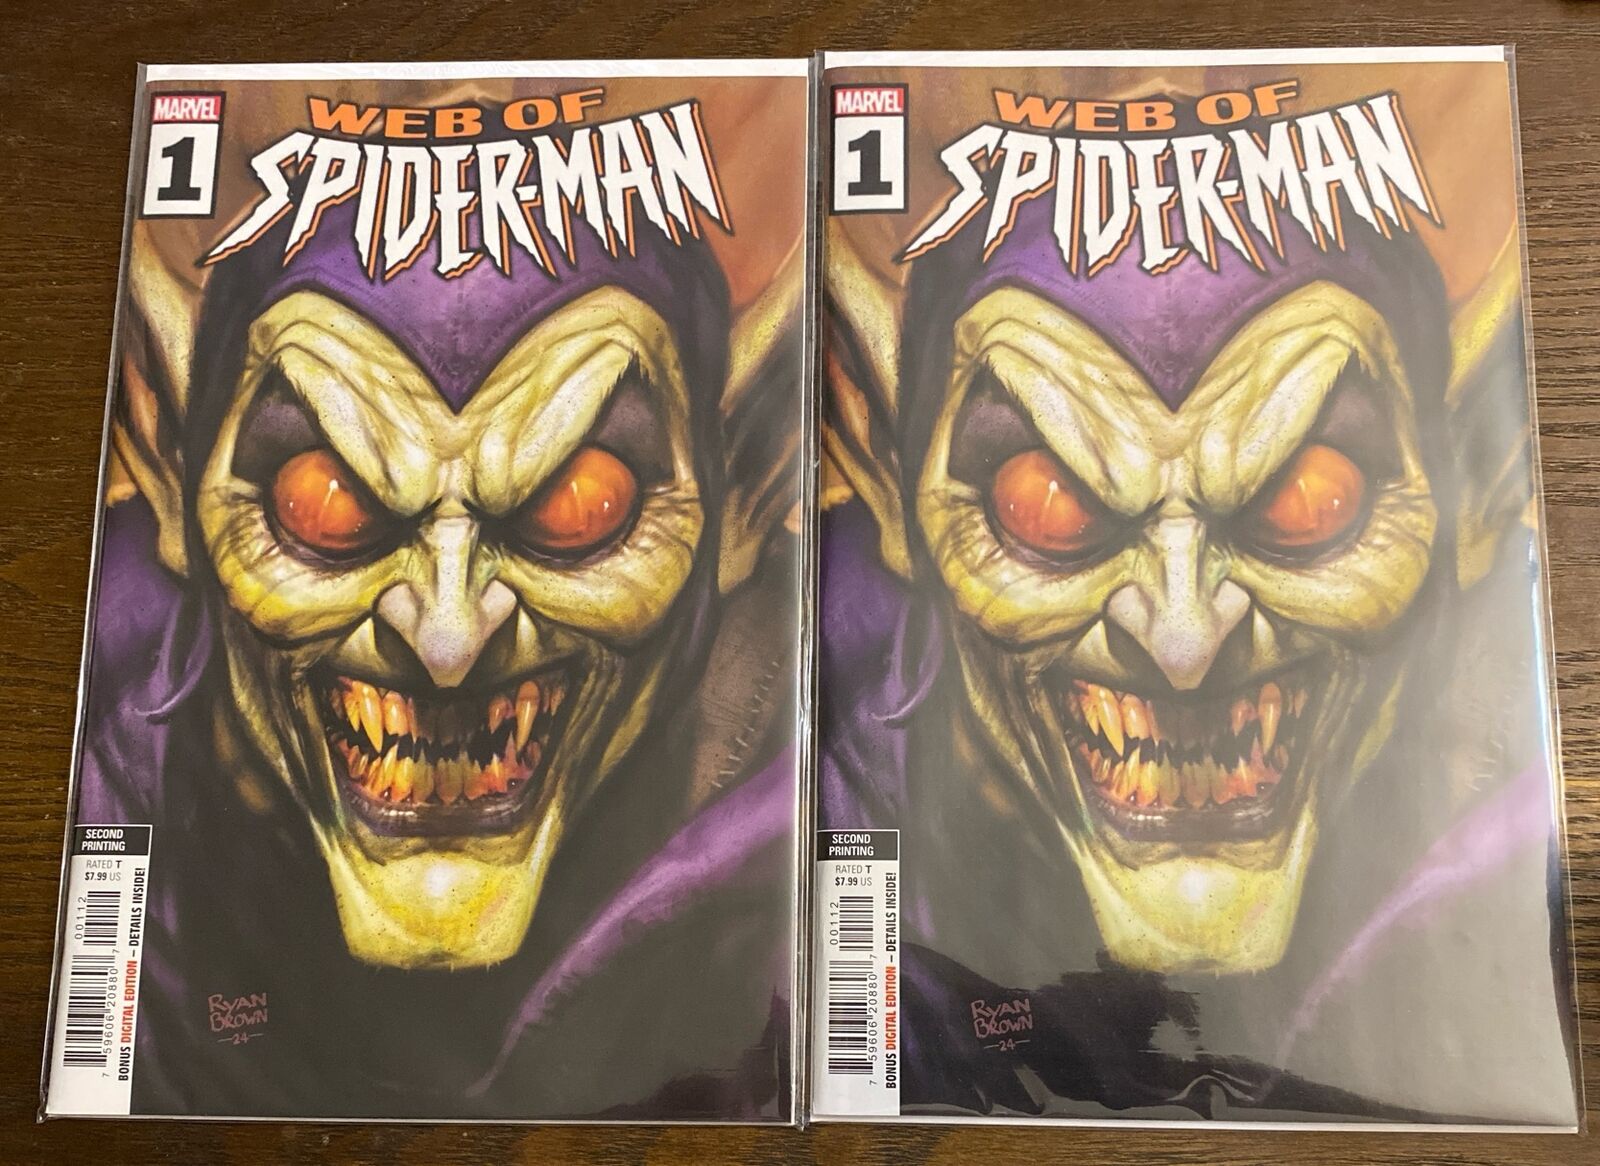 WEB OF SPIDER-MAN #1 RYAN BROWN 2ND PRINT VARIANT (2024) Higher Grade Lot of 2